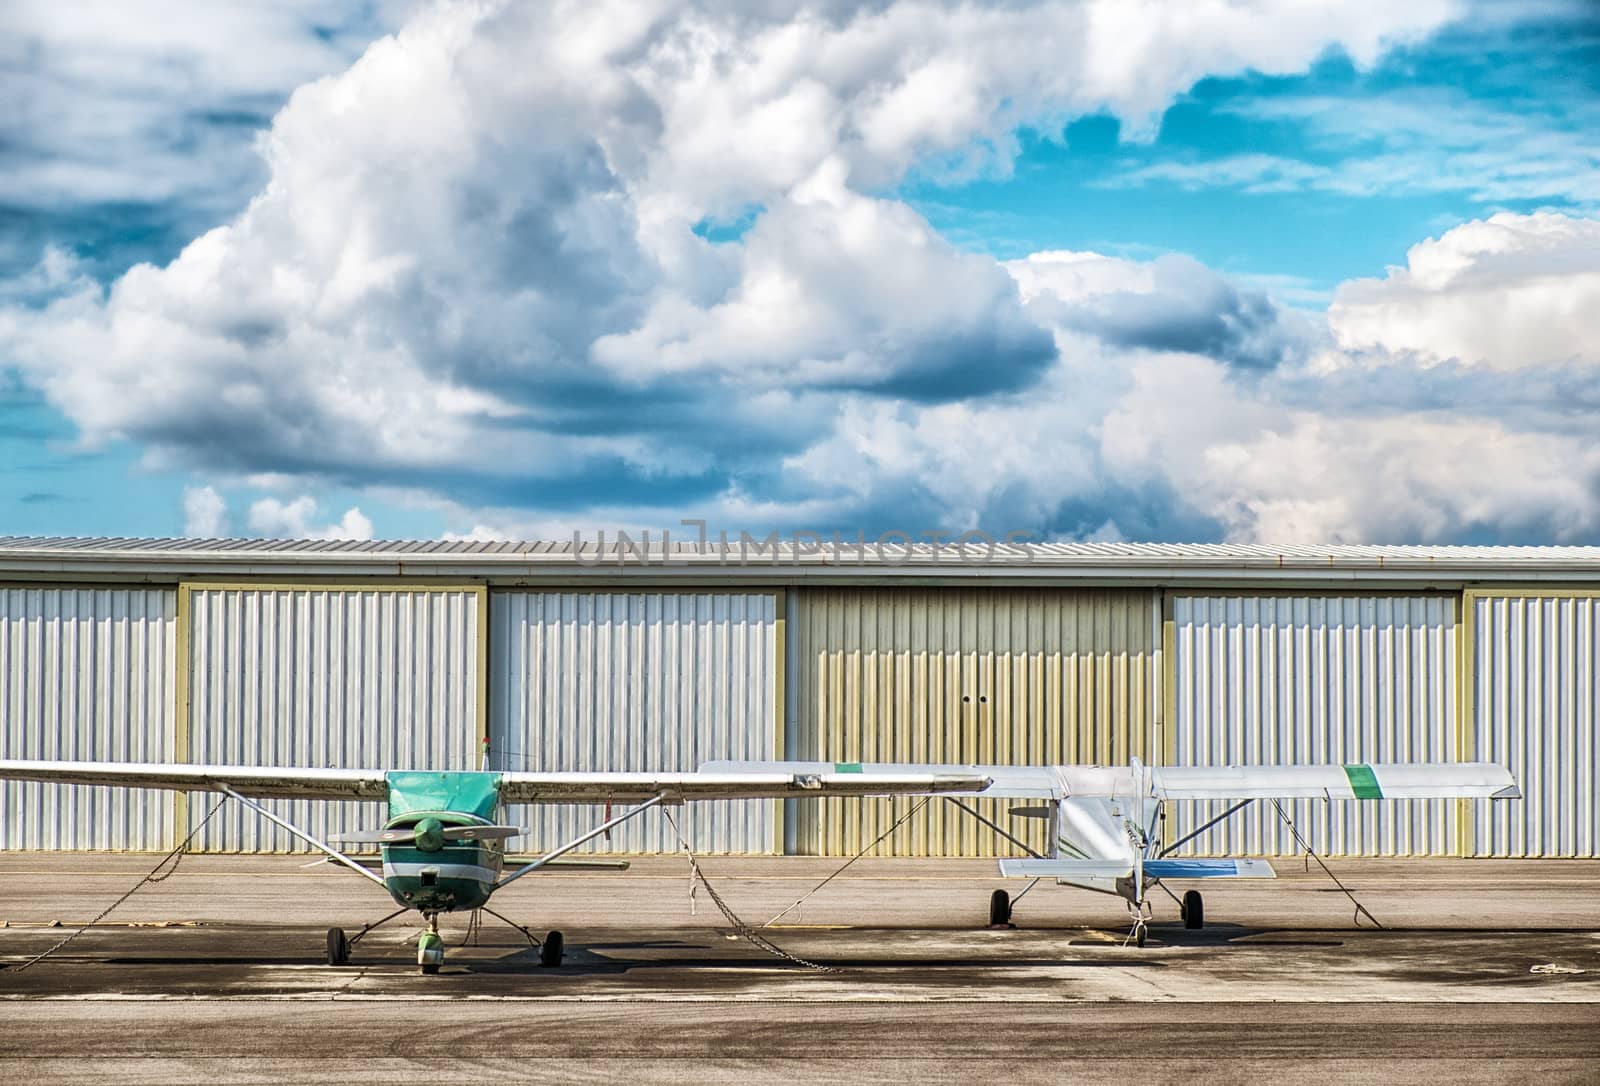 light airplanes at airfield, hanger behind by rongreer